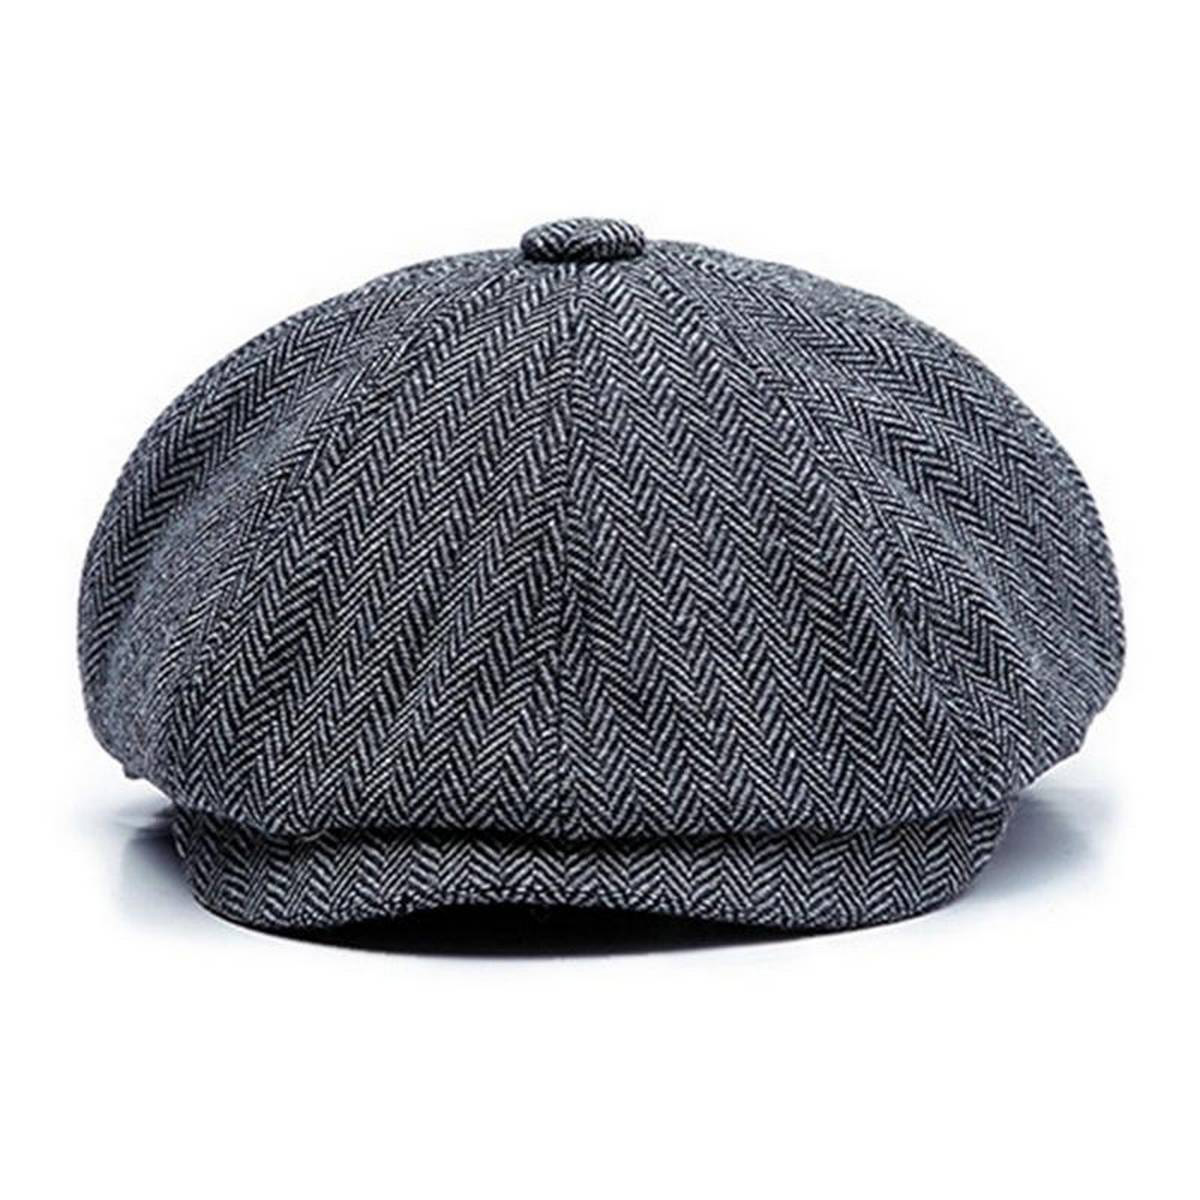 Hats Men Clothing, Shoes & Accessories Mens Peaky Blinders Beret Hats ...